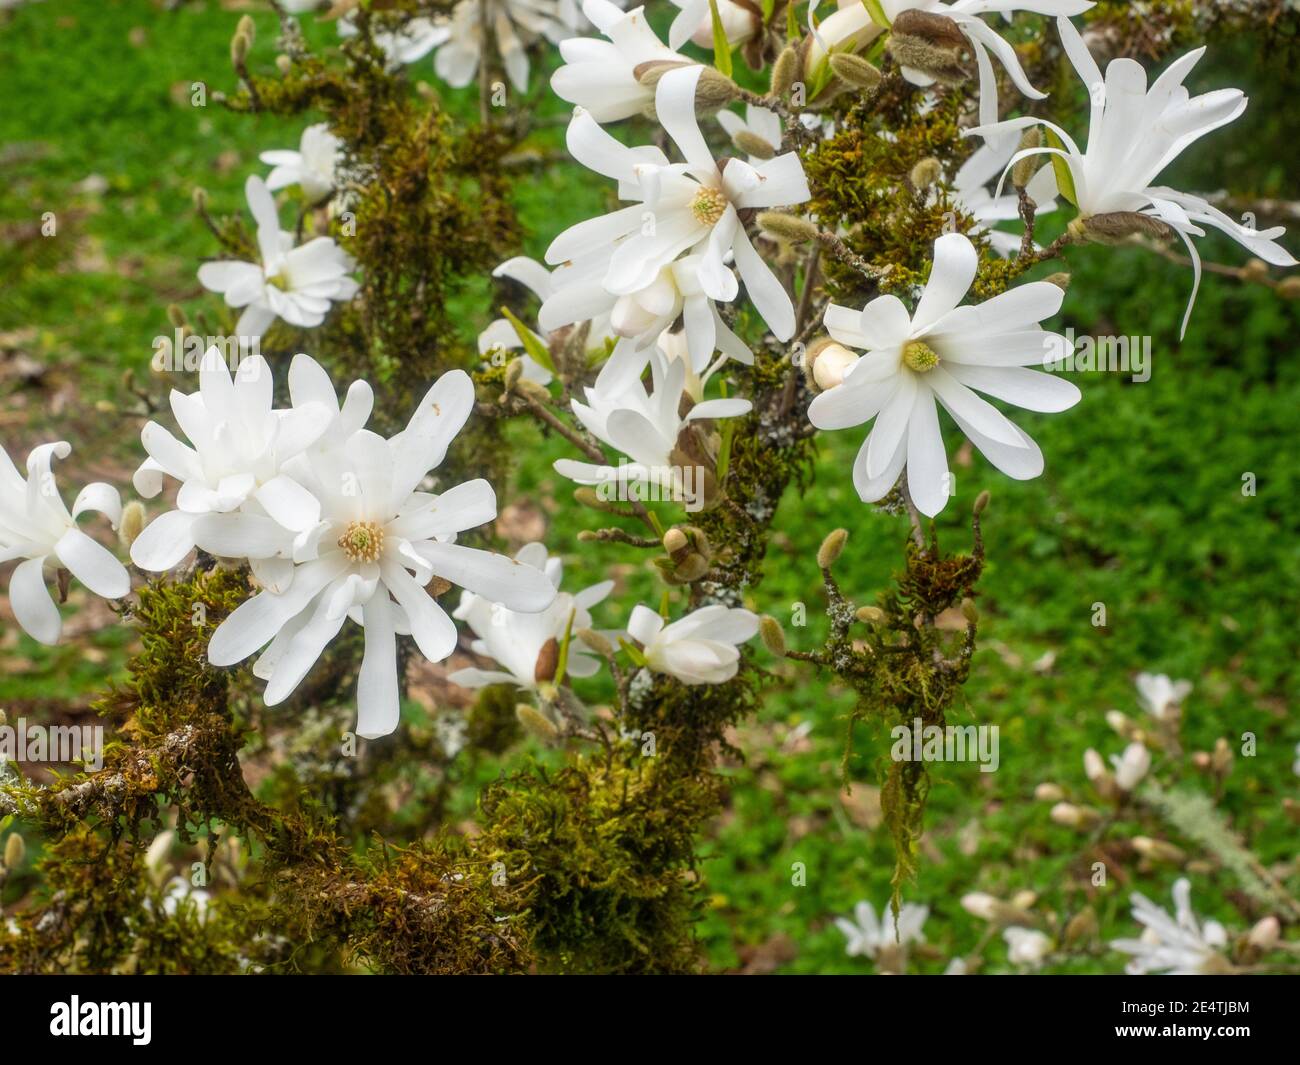 Star magnolia (Magnolia stellata) is a slow-growing shrub or small tree native to Japan. It bears large, showy white or pink flowers in early spring, Stock Photo